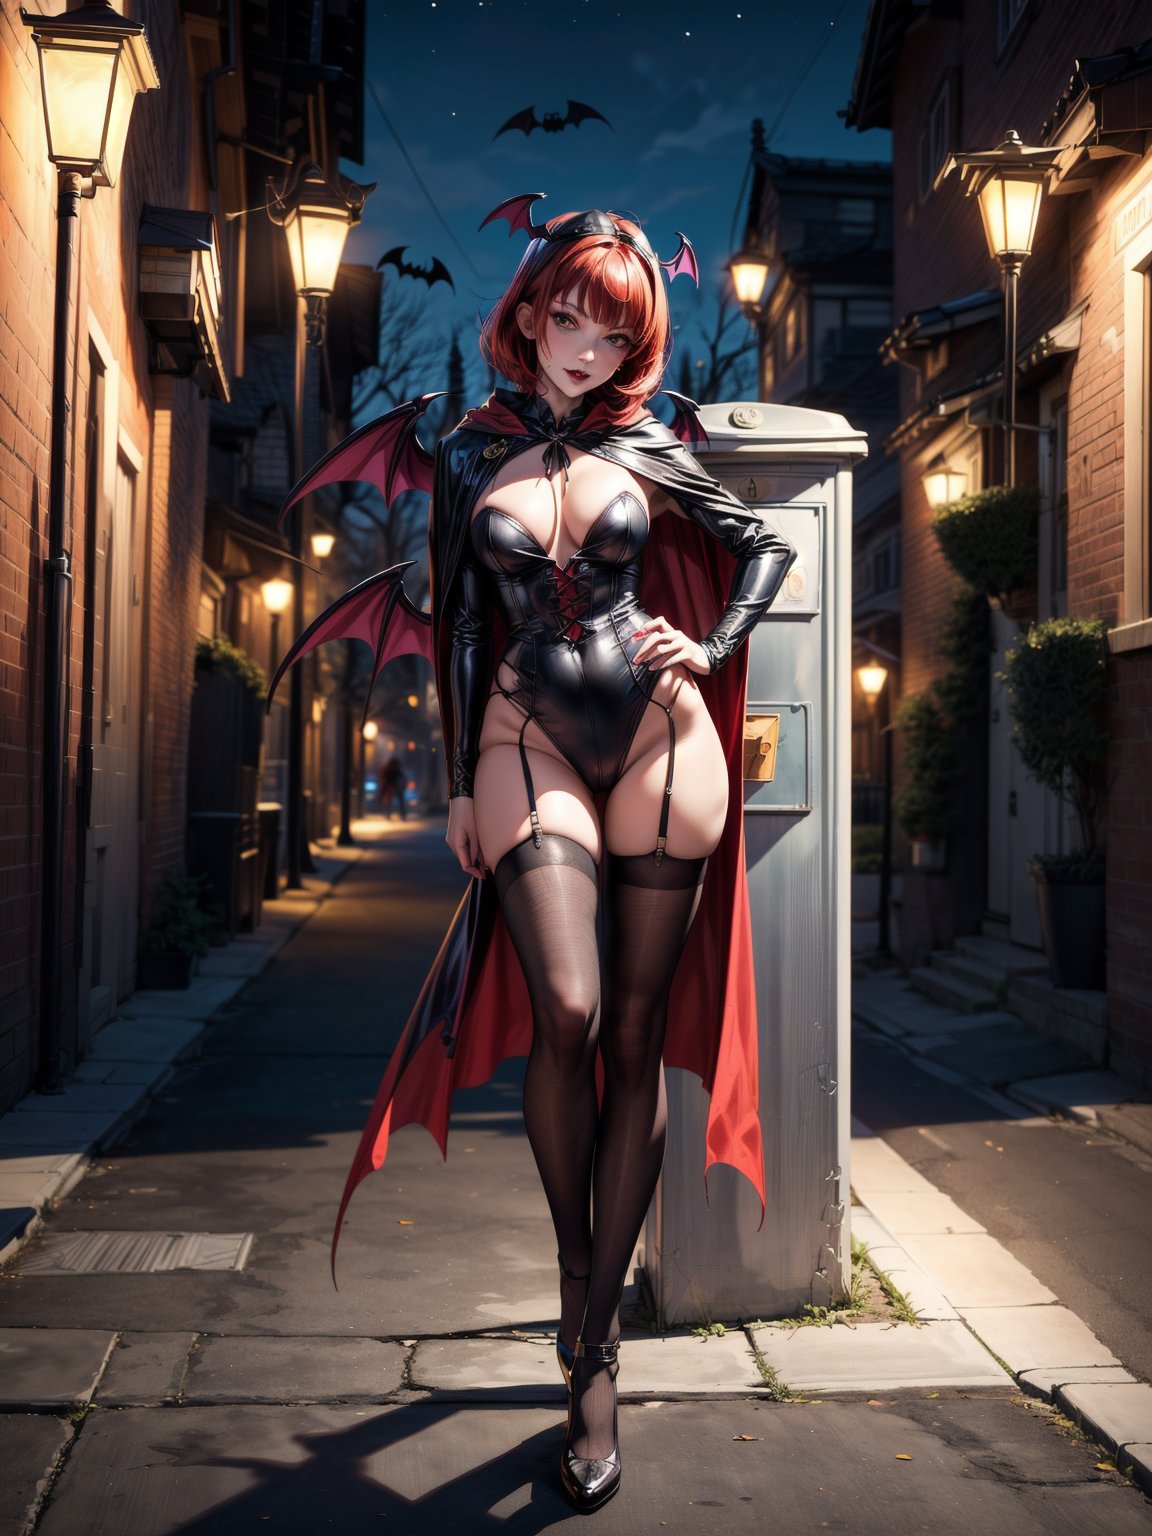 ((1woman)), ((wearing erotic vampire costume, with long cape, bat wings on head, very pale and whitish skin)), ((gigantic breasts)), ((short red hair, hair with bangs in front of the eyes)), ((staring at the viewer)), 1woman ((is leaning against a very high mailbox doing erotic pose)), ((in a small neighborhood, leaning against a post office box fazend ,  halloween party, multiple people with different costumes in the neighborhood, is at night, lampposts illuminating, the neighborhood)), (((full body))), 16k, UHD, ((better quality, better resolution, better detail))